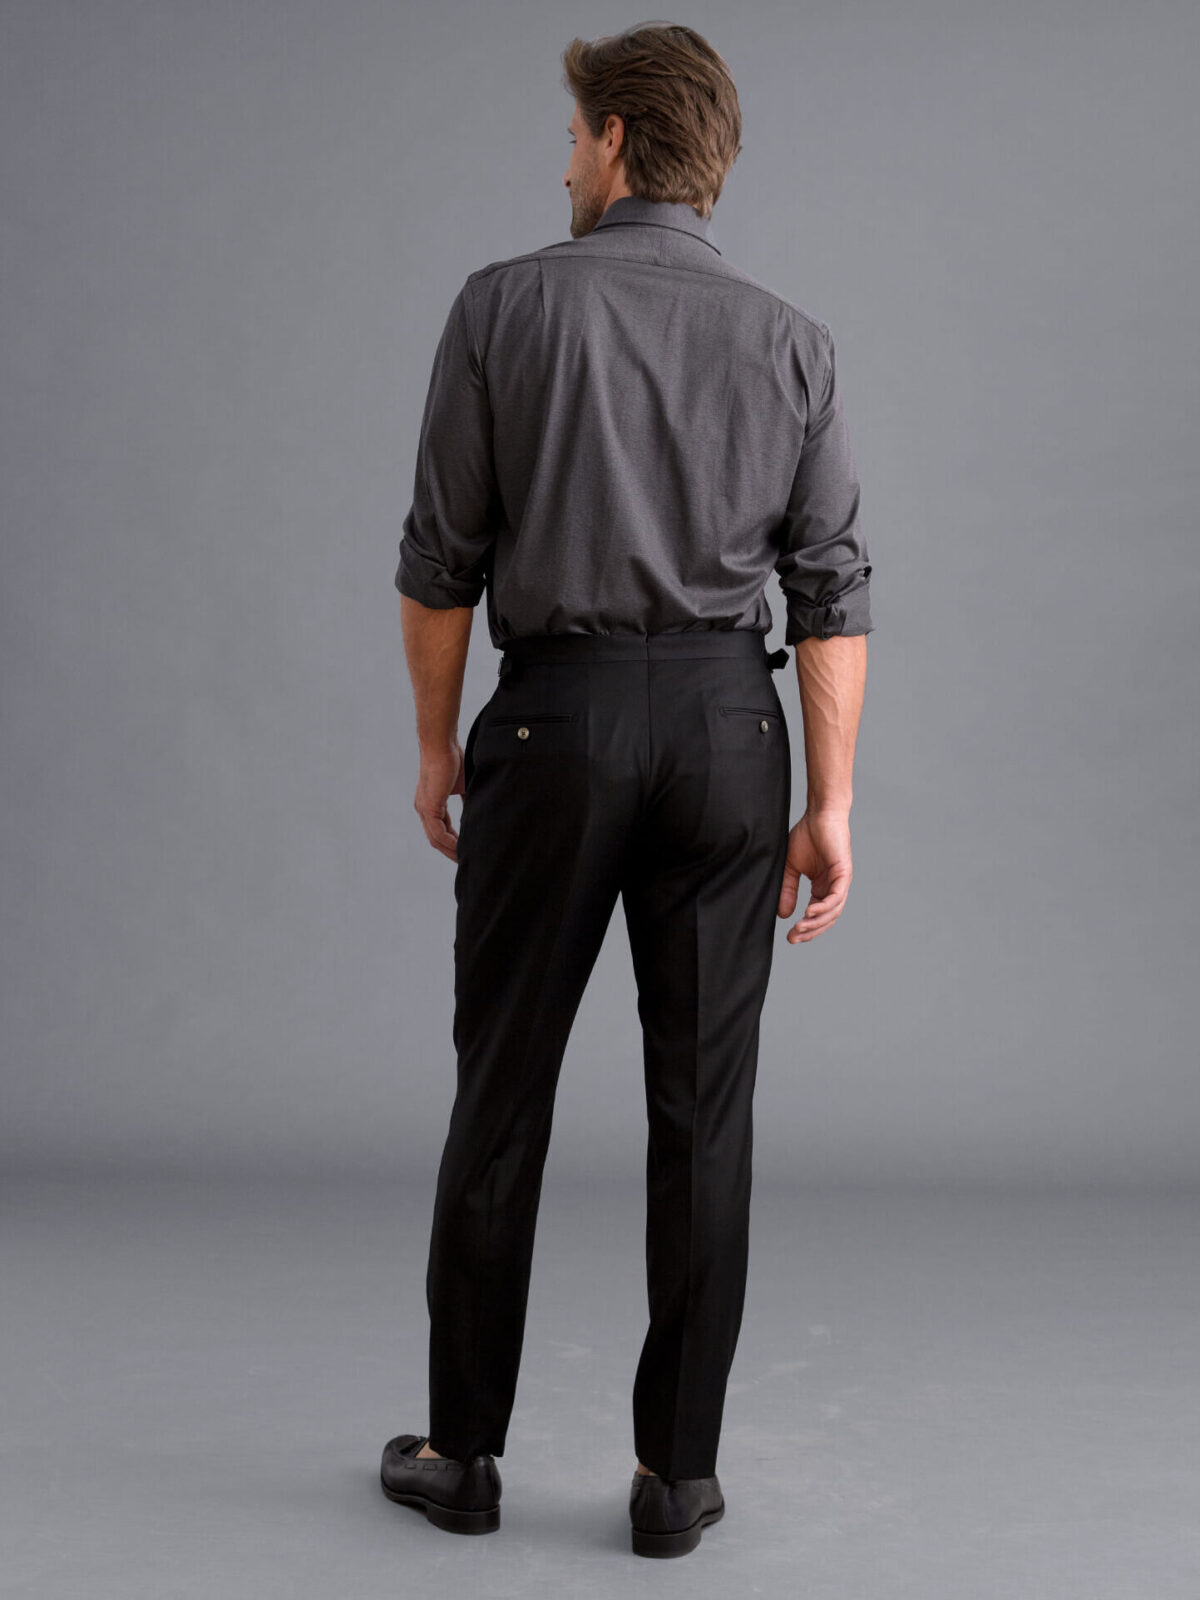 Tuxedo Pants BLACK All Wool NON PLEATED Trousers